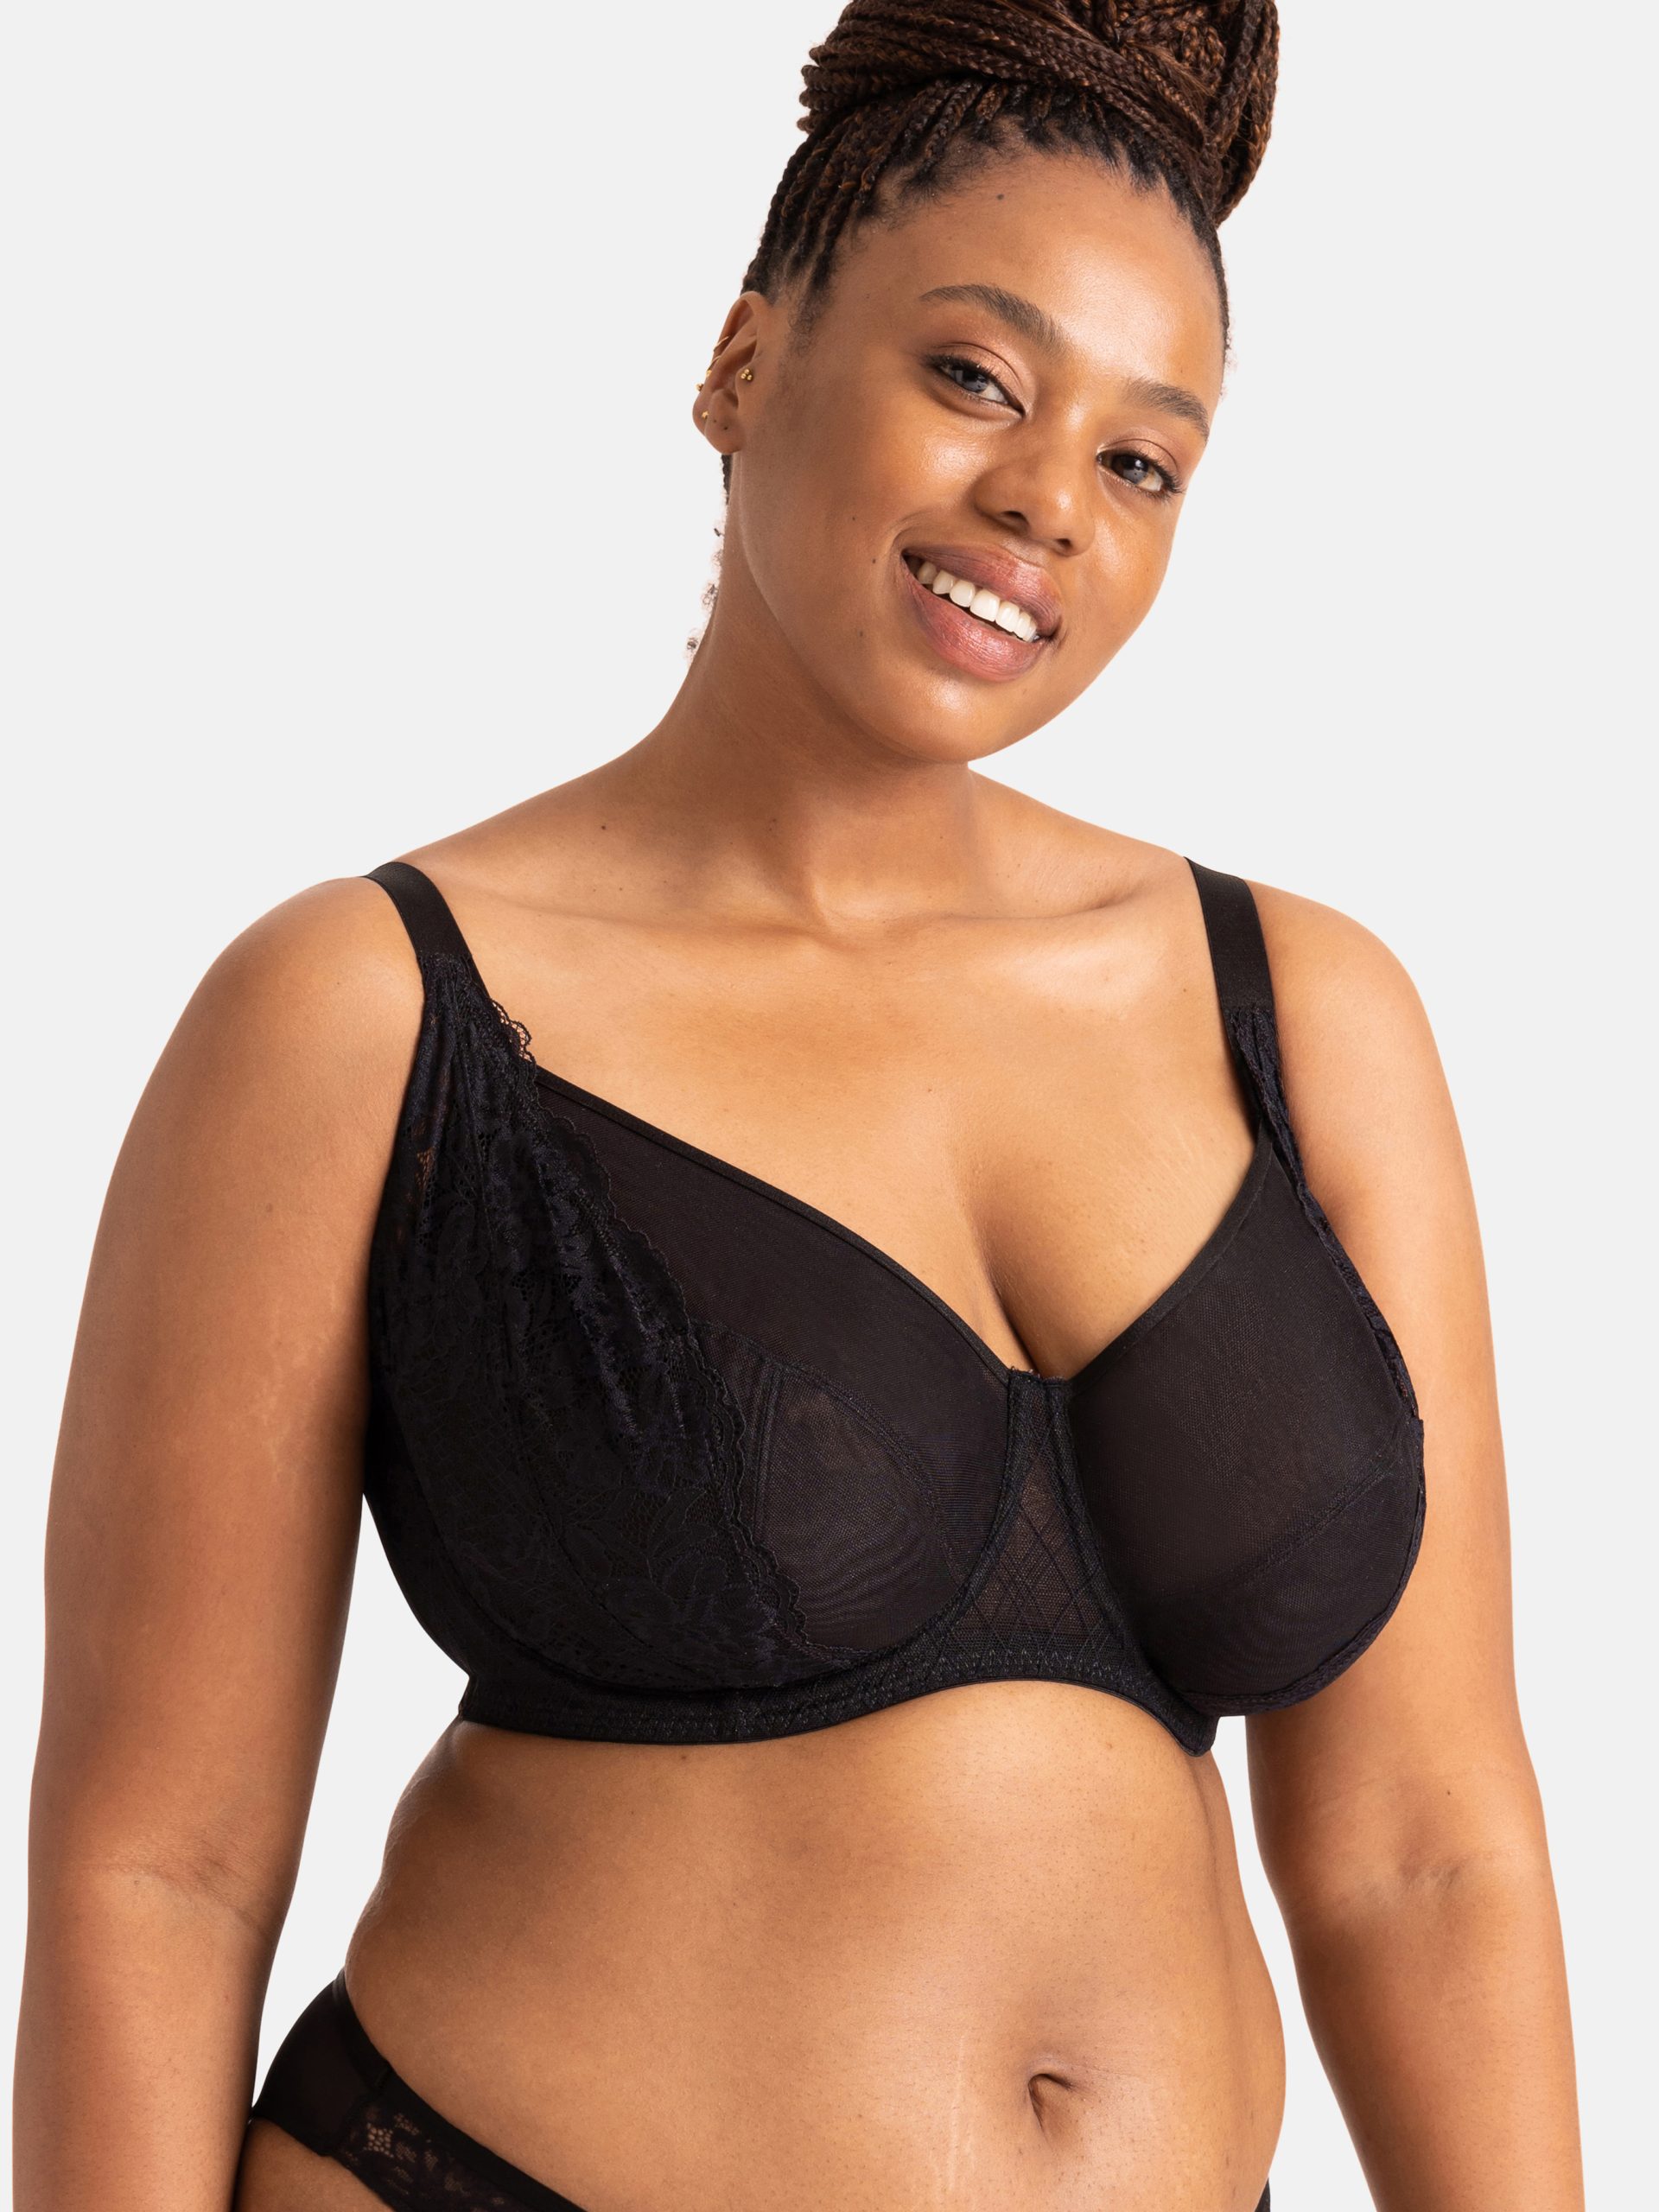  LANREN Plus Size Women Wire Free Bra Lace Sexy Bra Woman Push  Up Adjustable Brassiere Femme Seamless Underwear Lady Bras (Color : Style  2-Black, Cup Size : 85B) : Clothing, Shoes